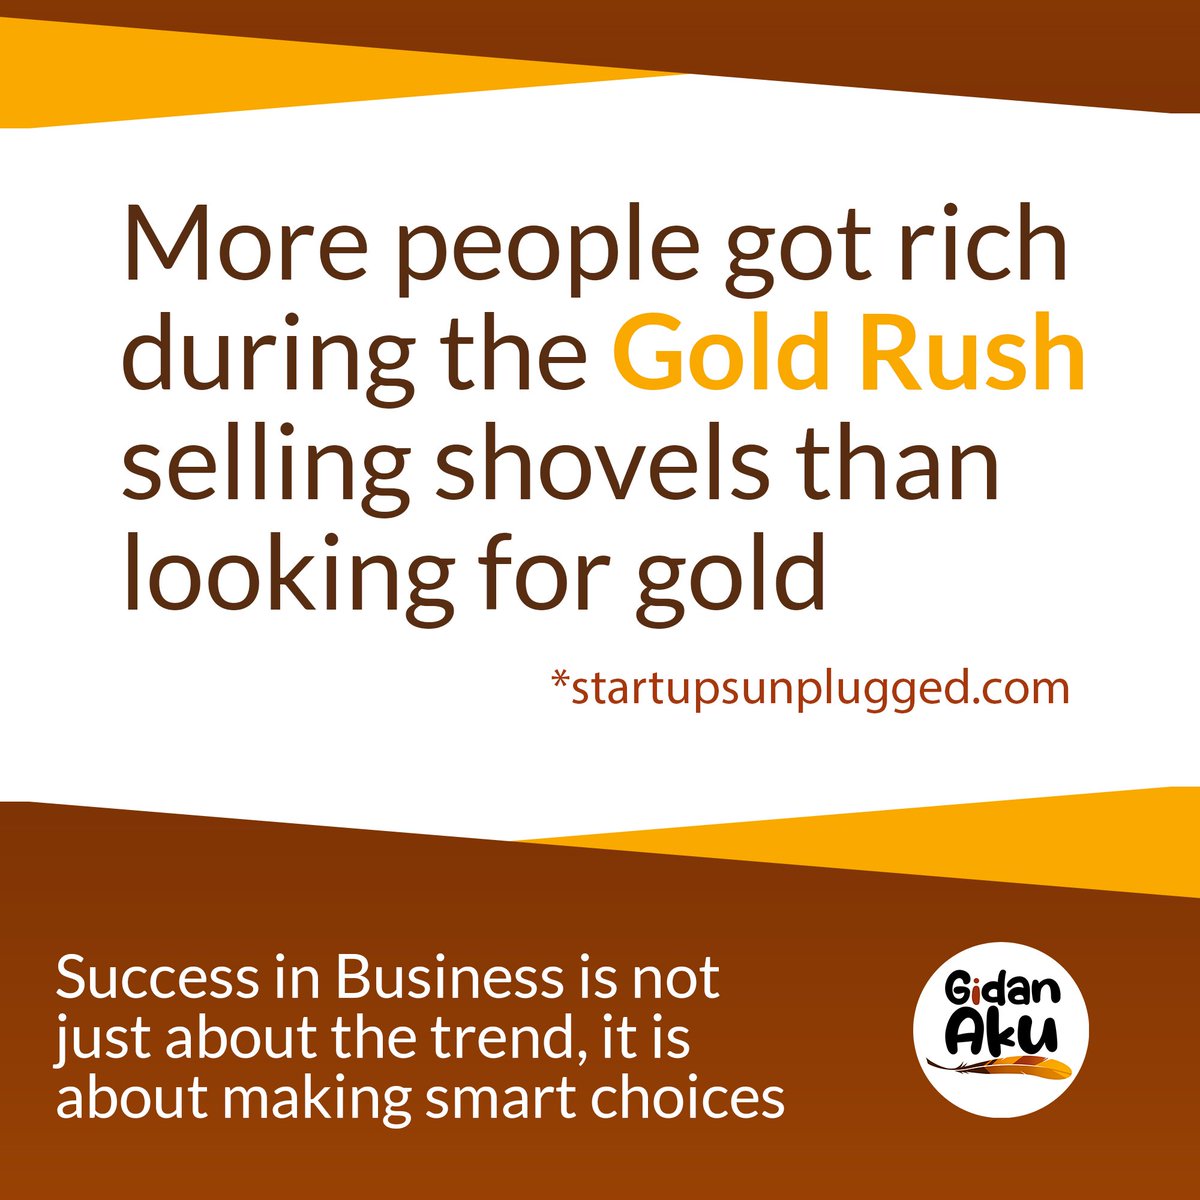 Have you made any smart choices today?

#gidanaku #adagency #businessdecisions